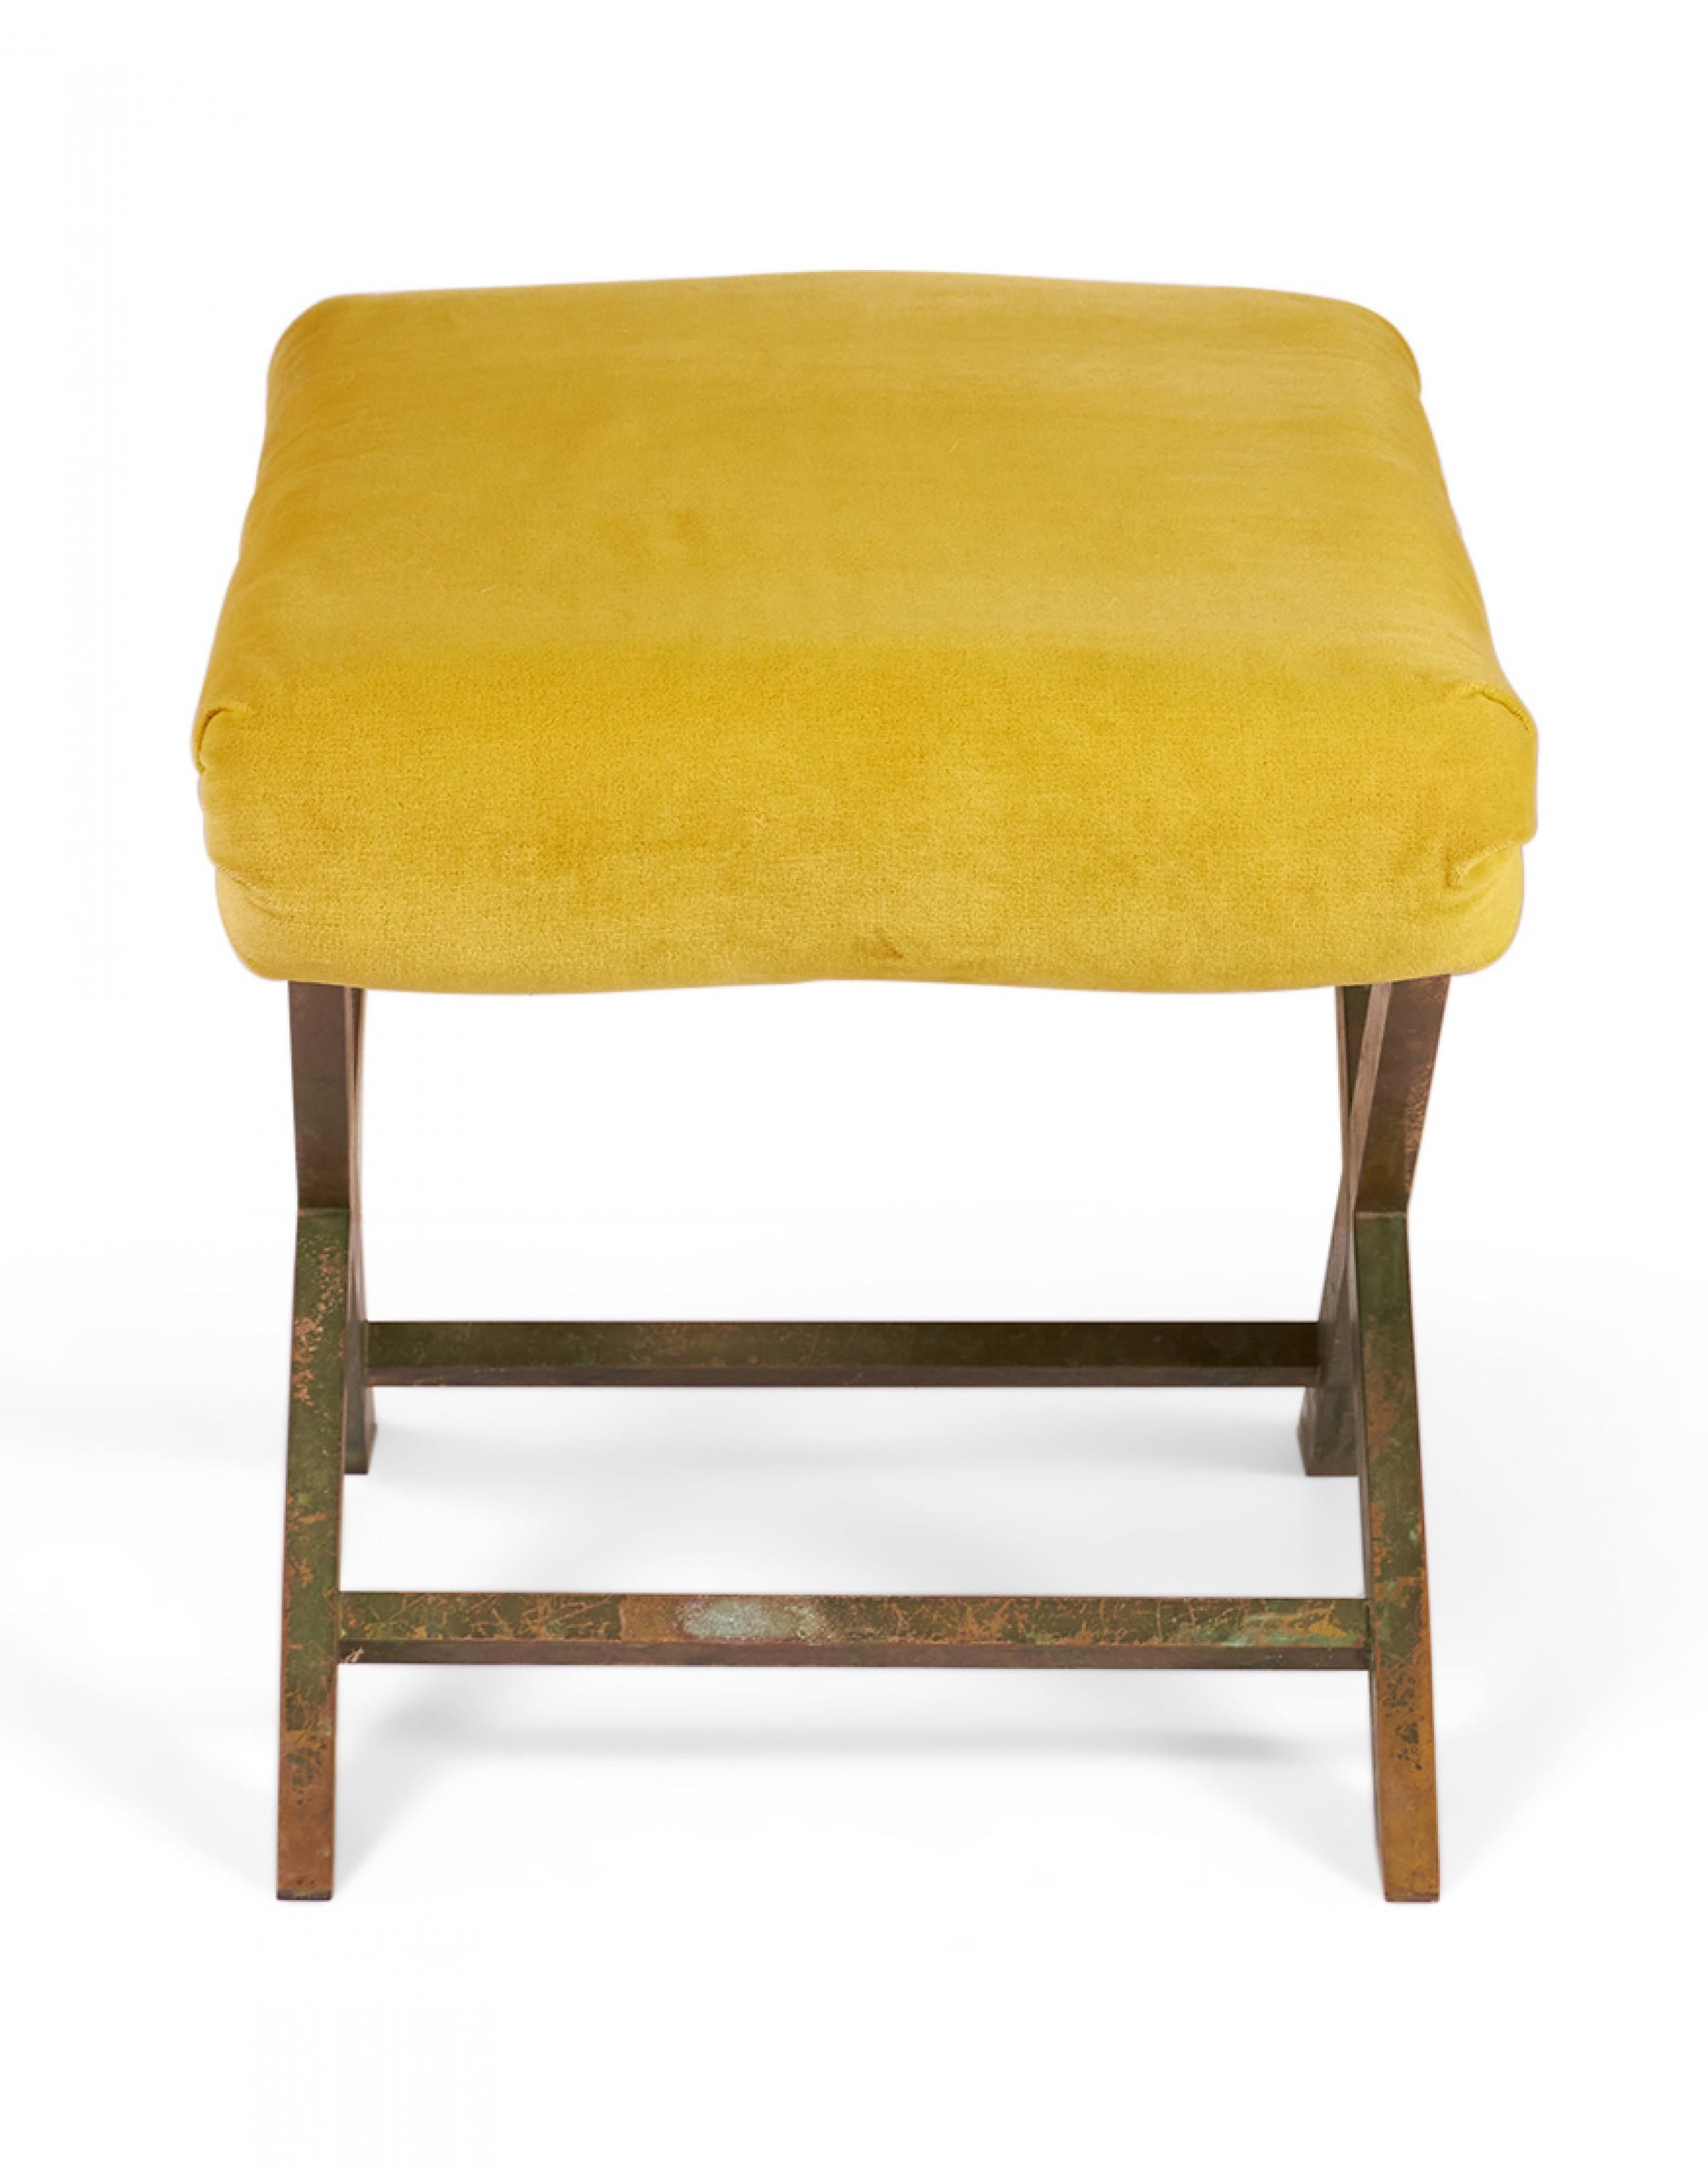 Metal Mid-Century Brass and Saffron Yellow Velour Upholstered X-Bench For Sale